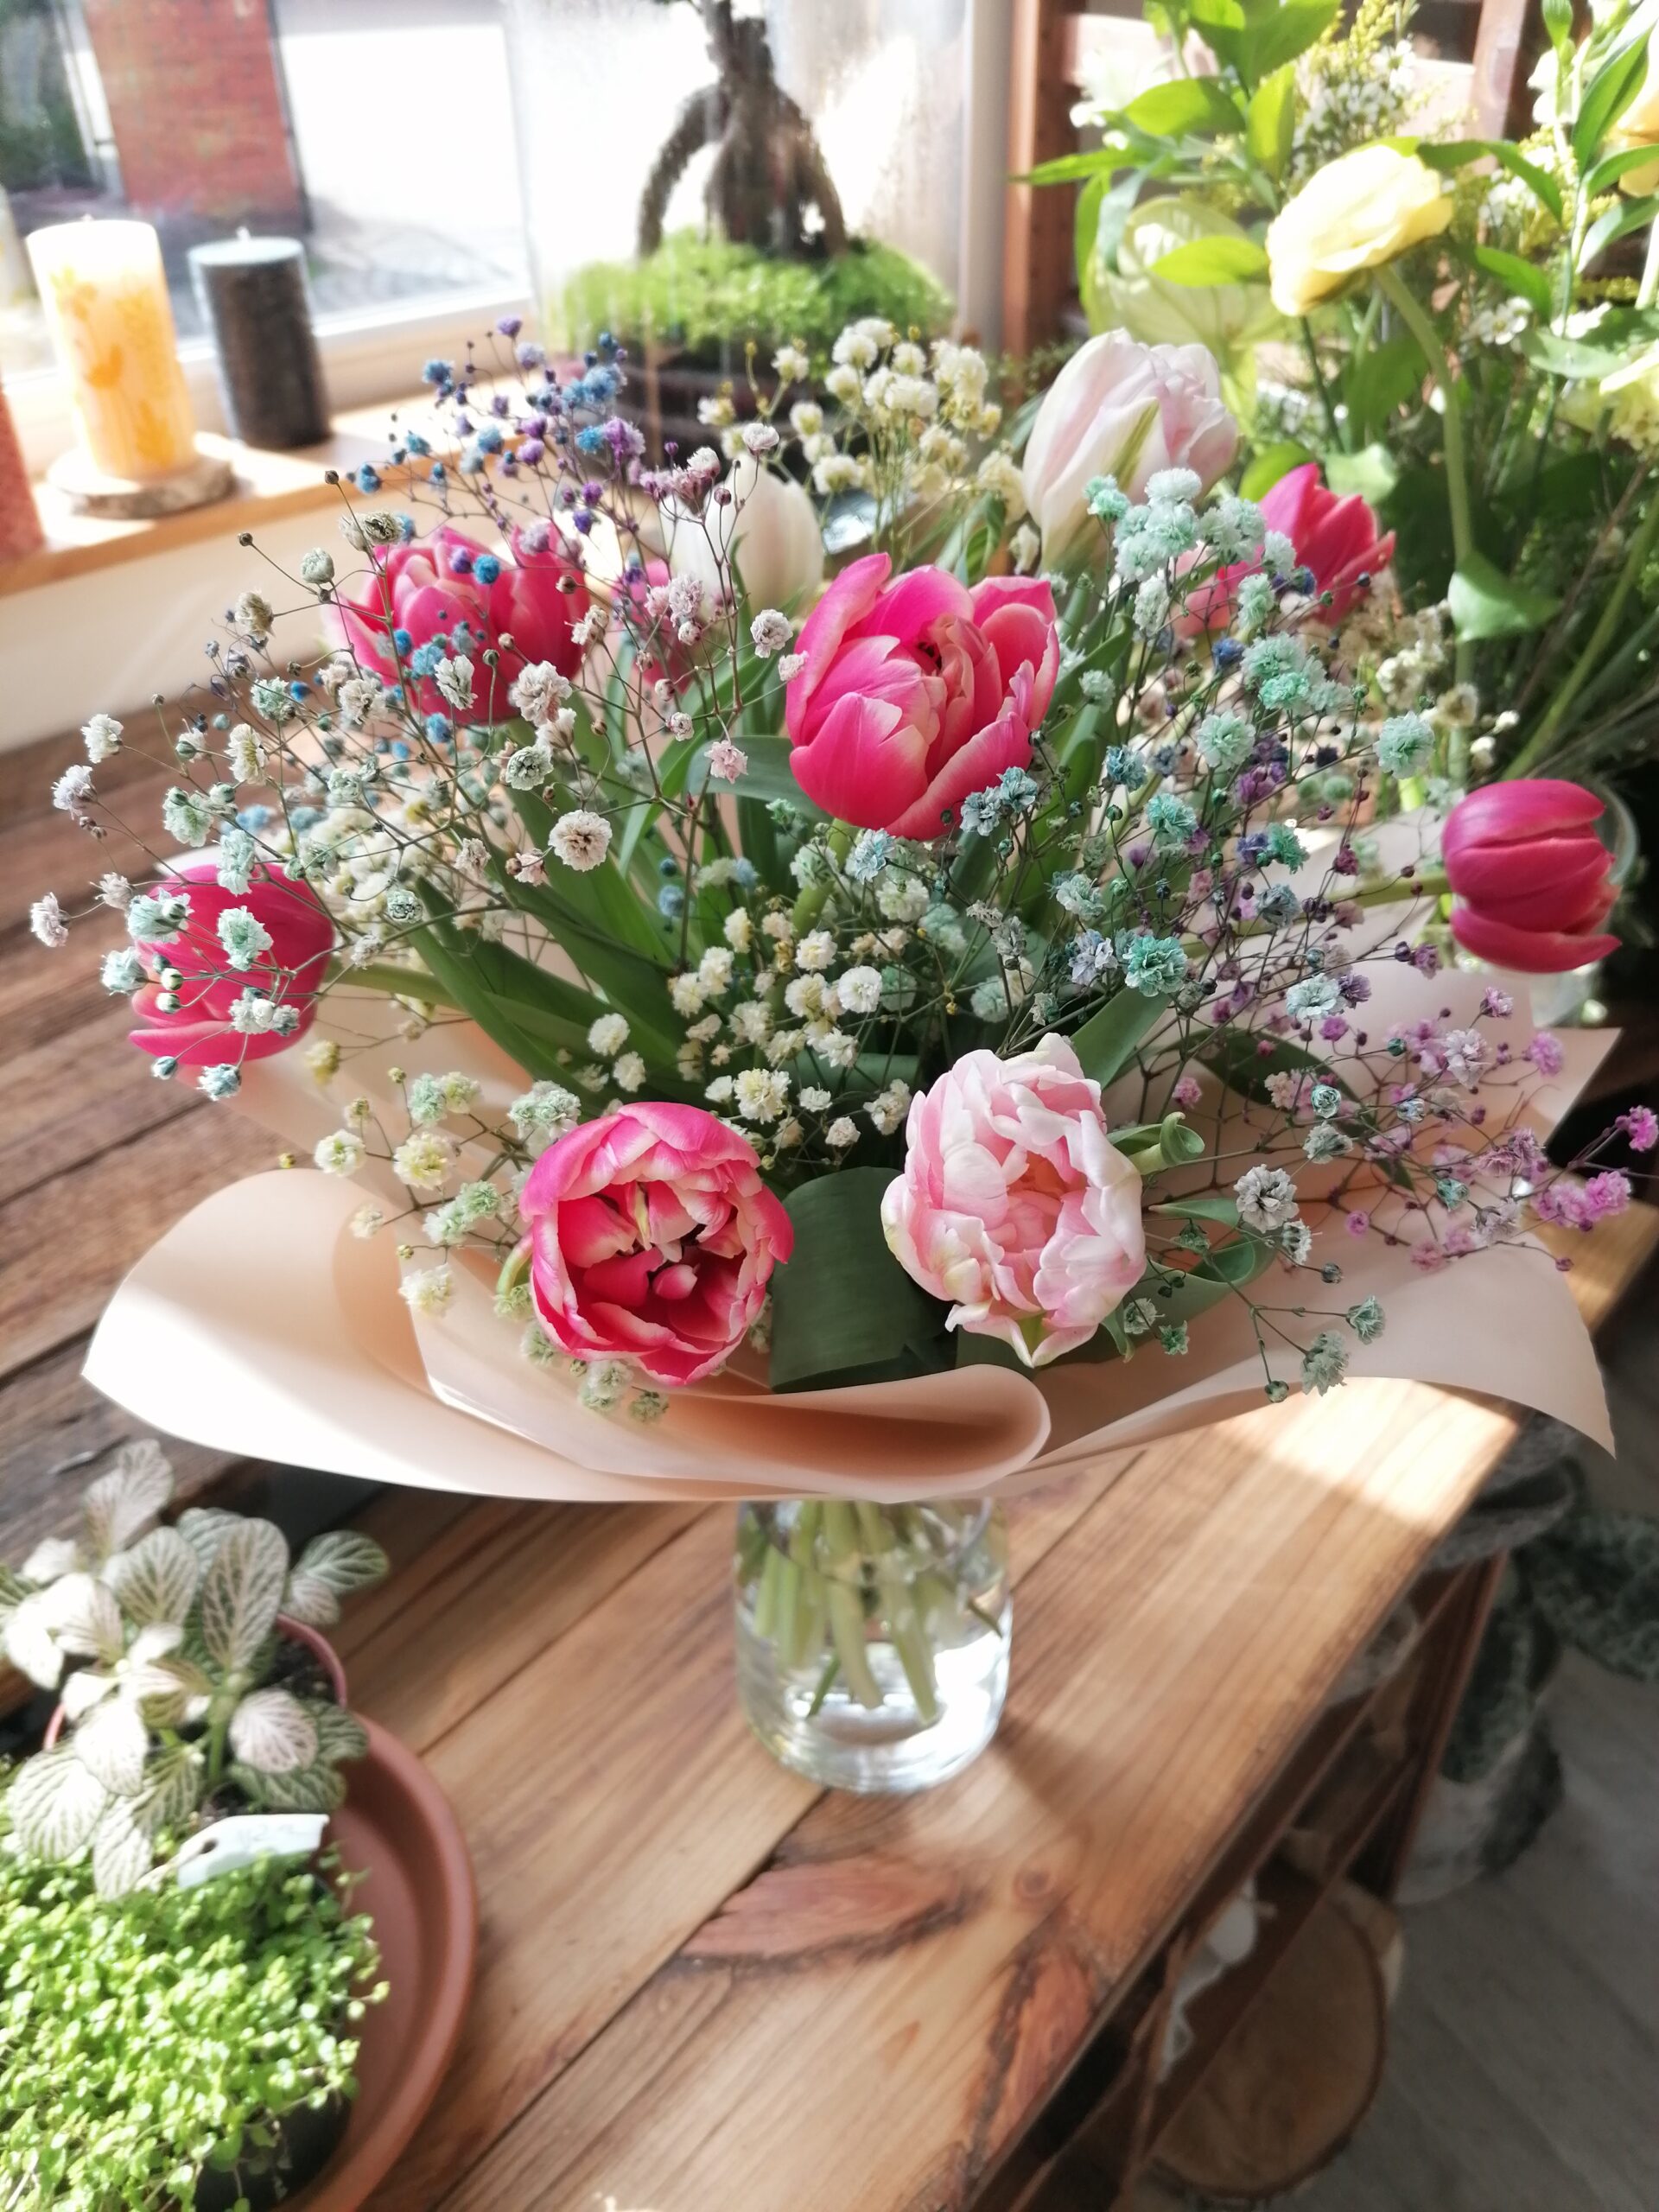 Spring tulips and rainbow gypsophila - that's joy, excitement, enthusiasm all in one!